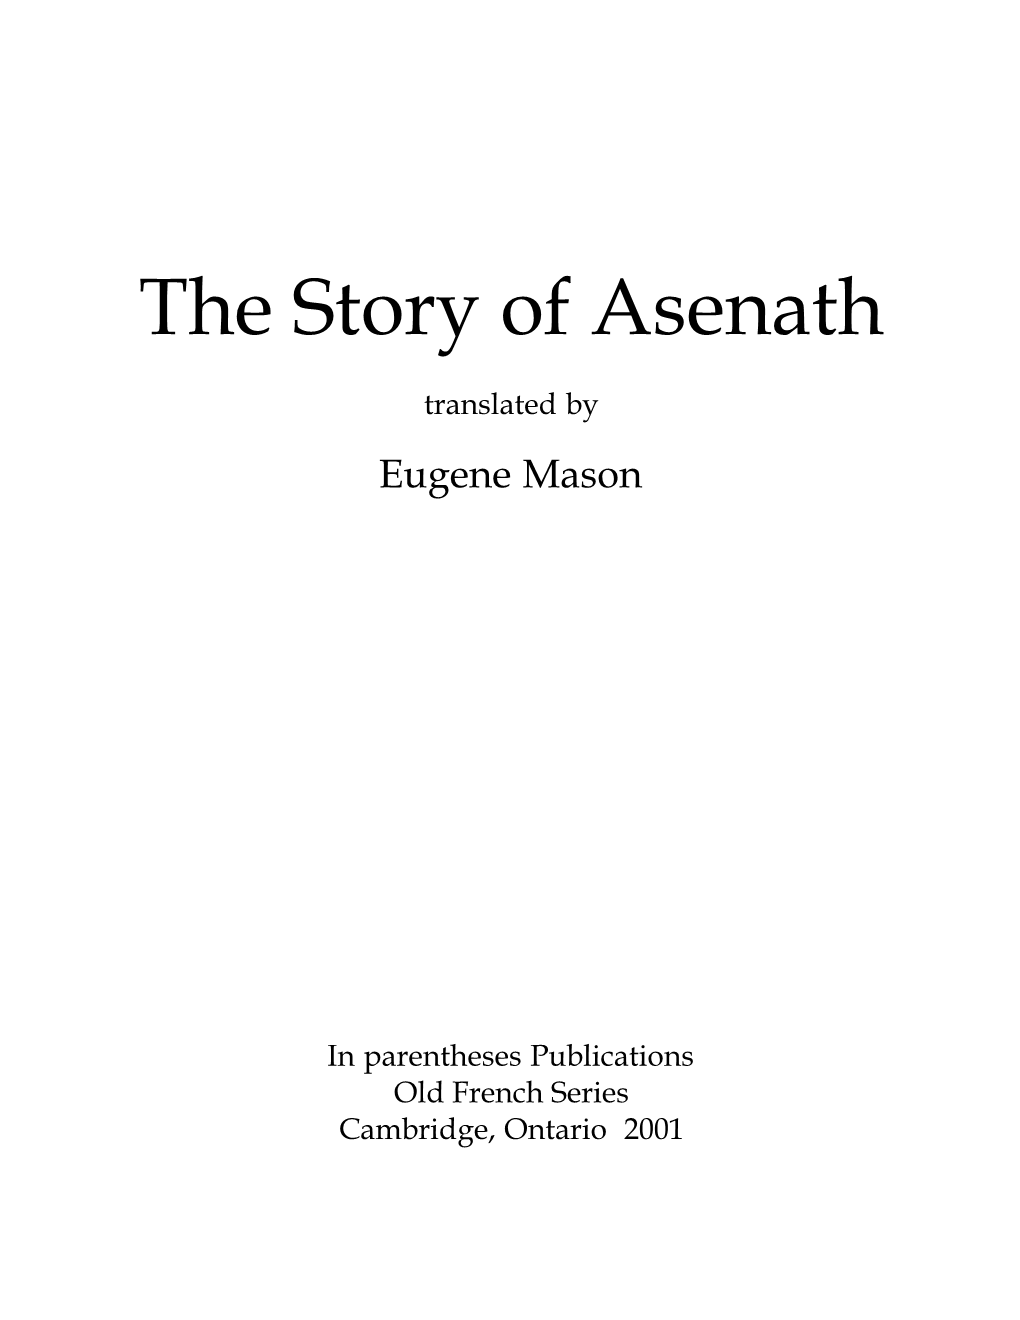 The Story of Asenath